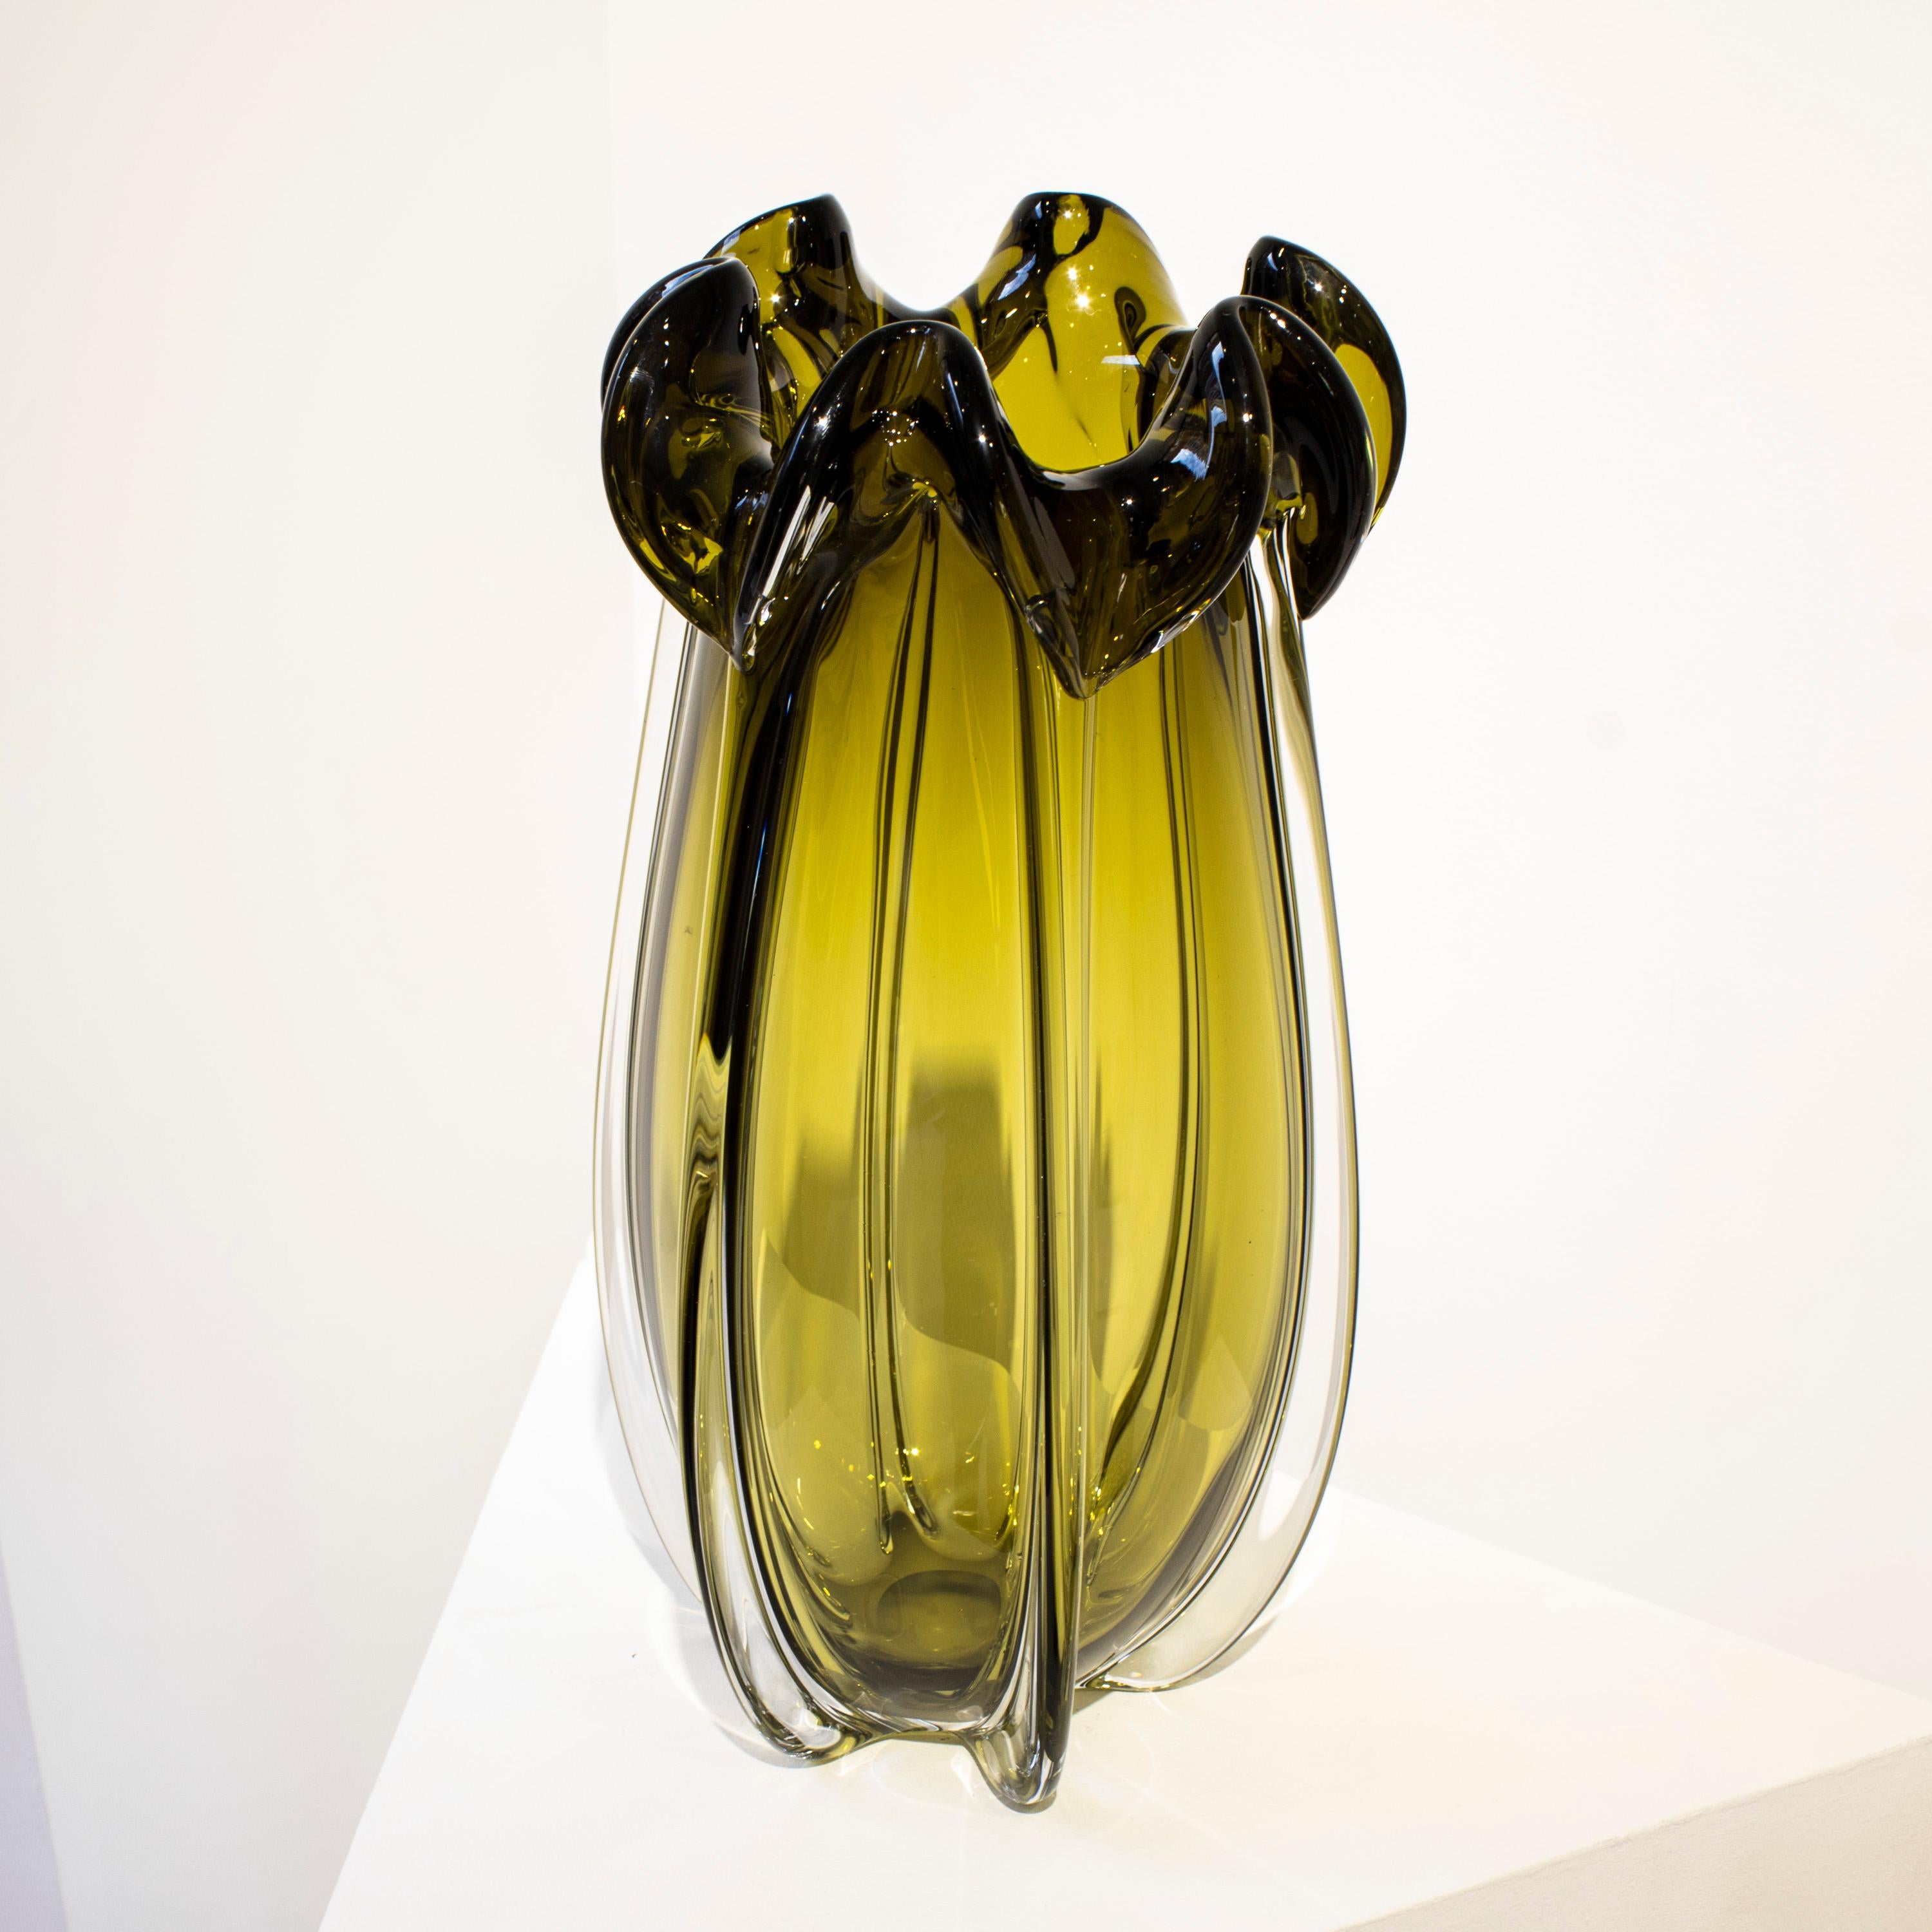 Hand-blown Italian ambar semi-transparent glass vase, with organic shapes inspired by nature. 